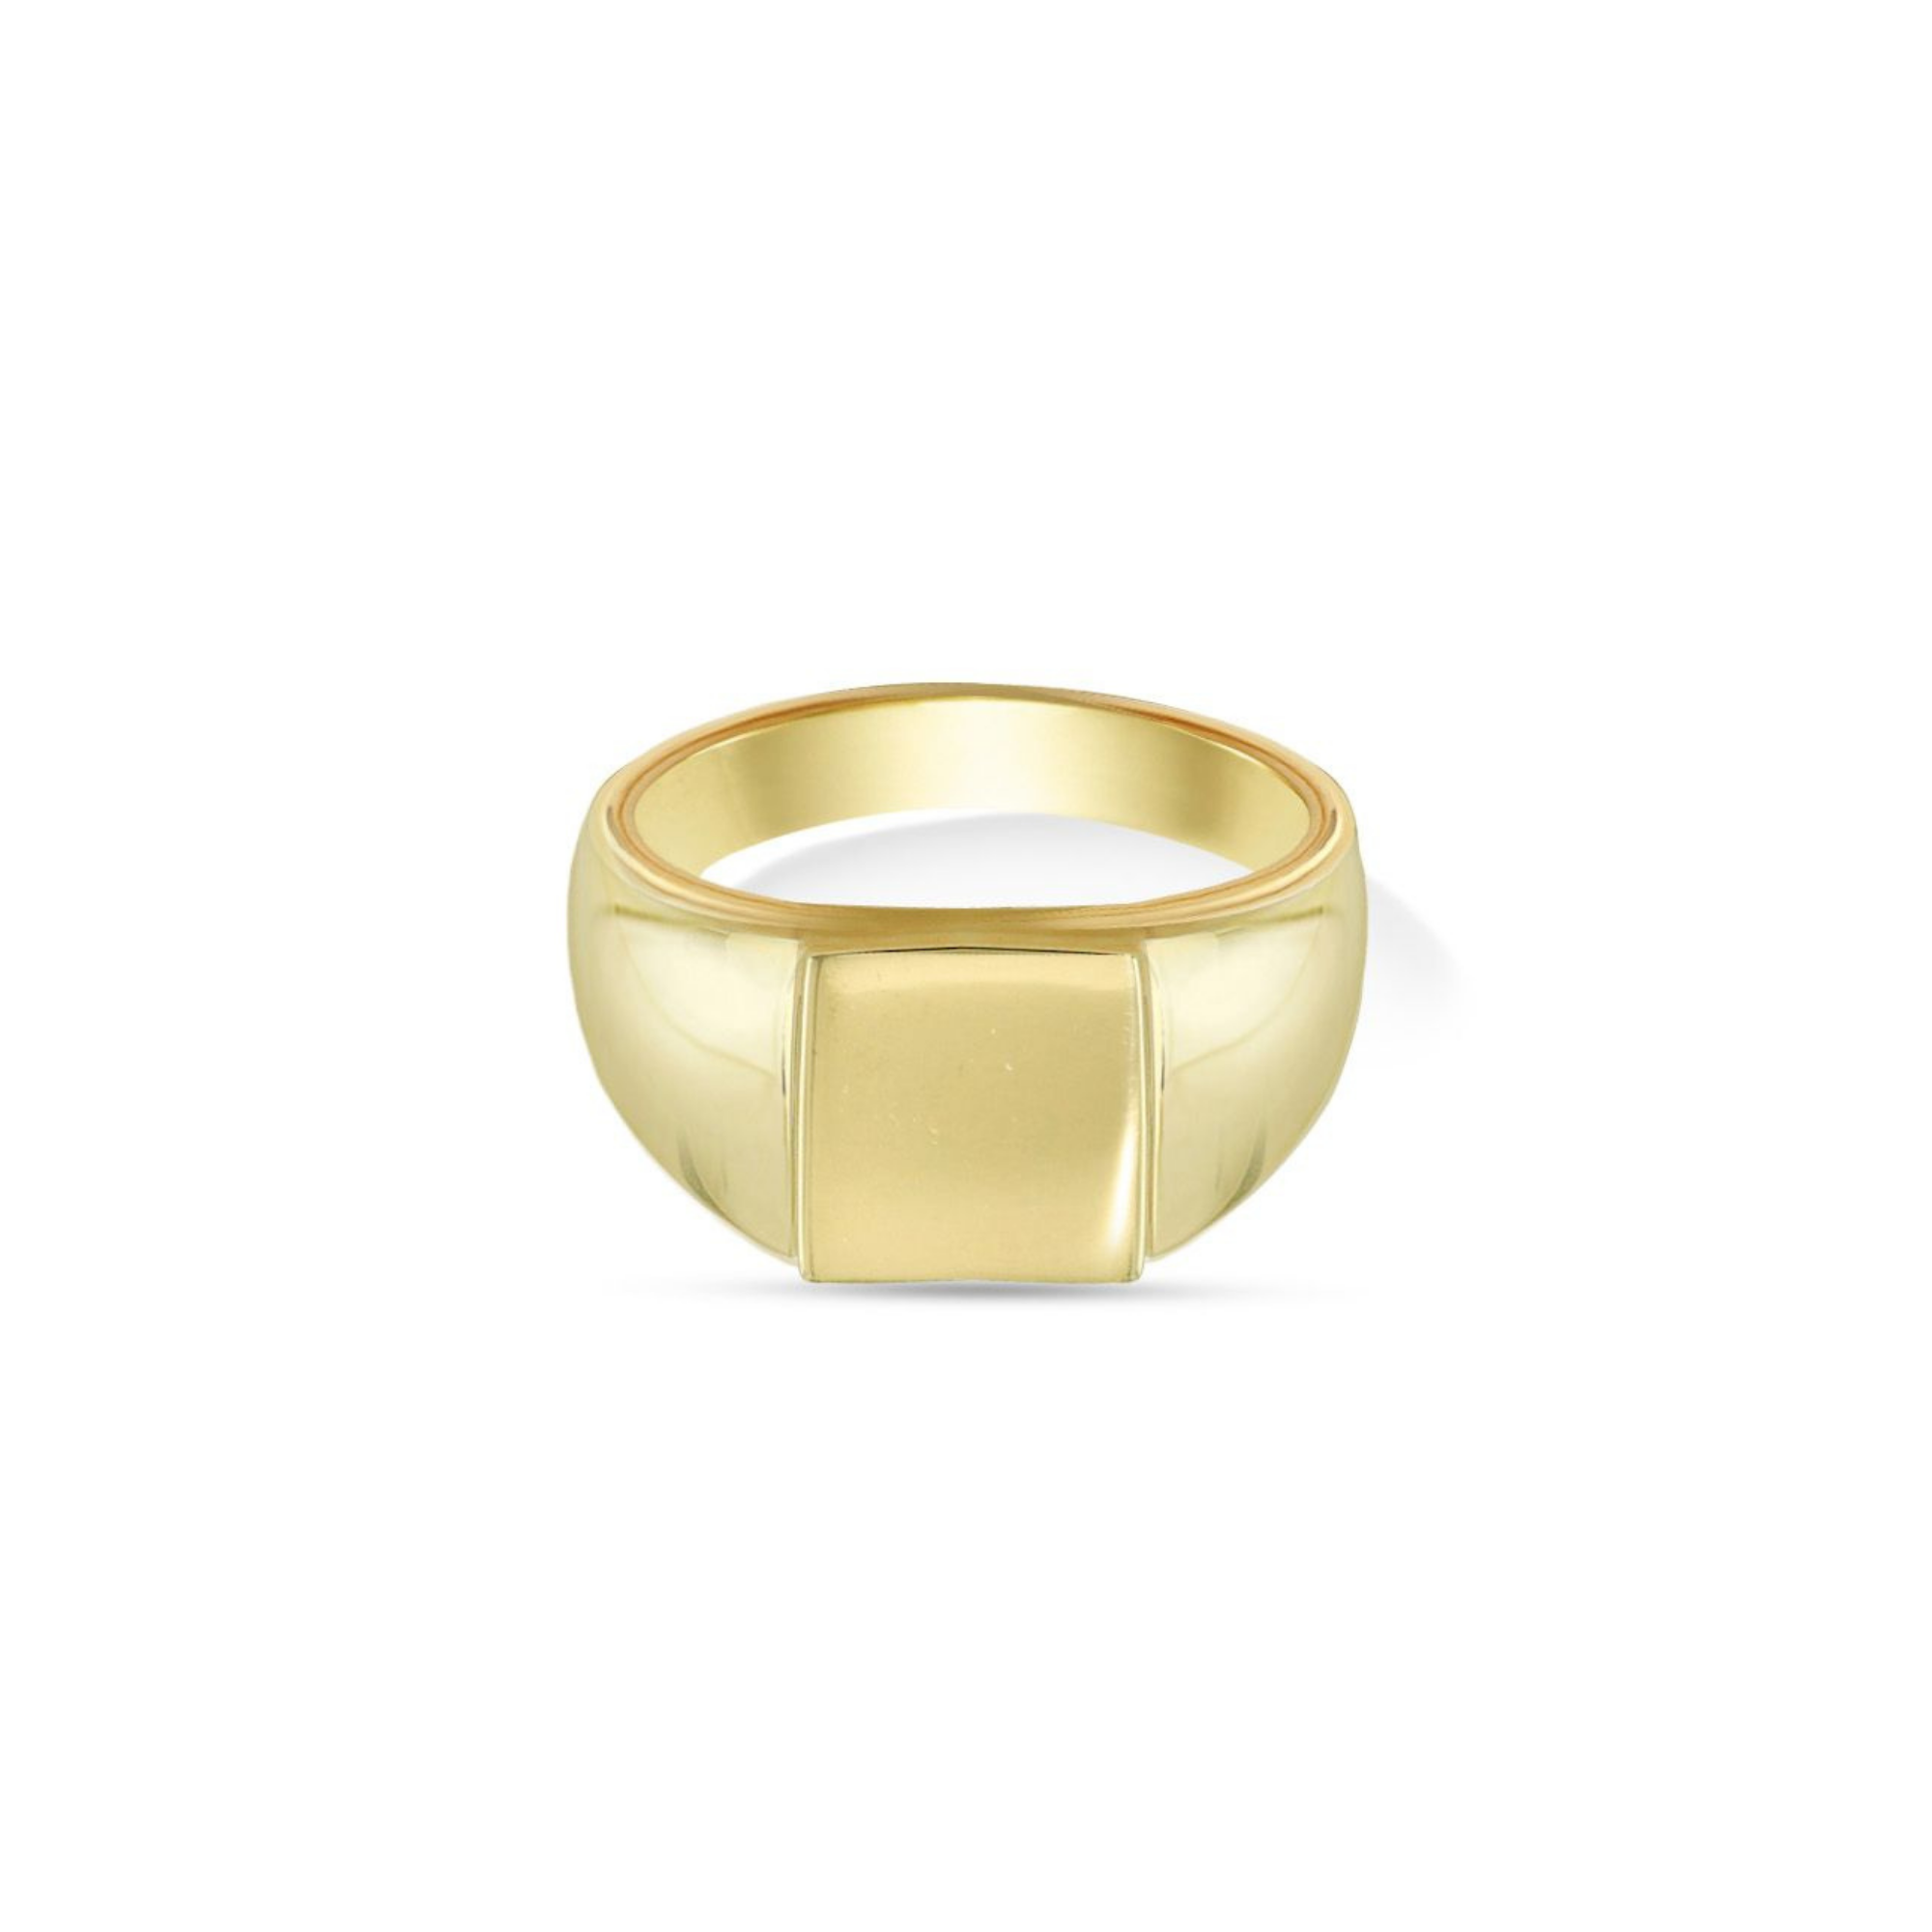 THE ESSENTIAL SQUARE RING